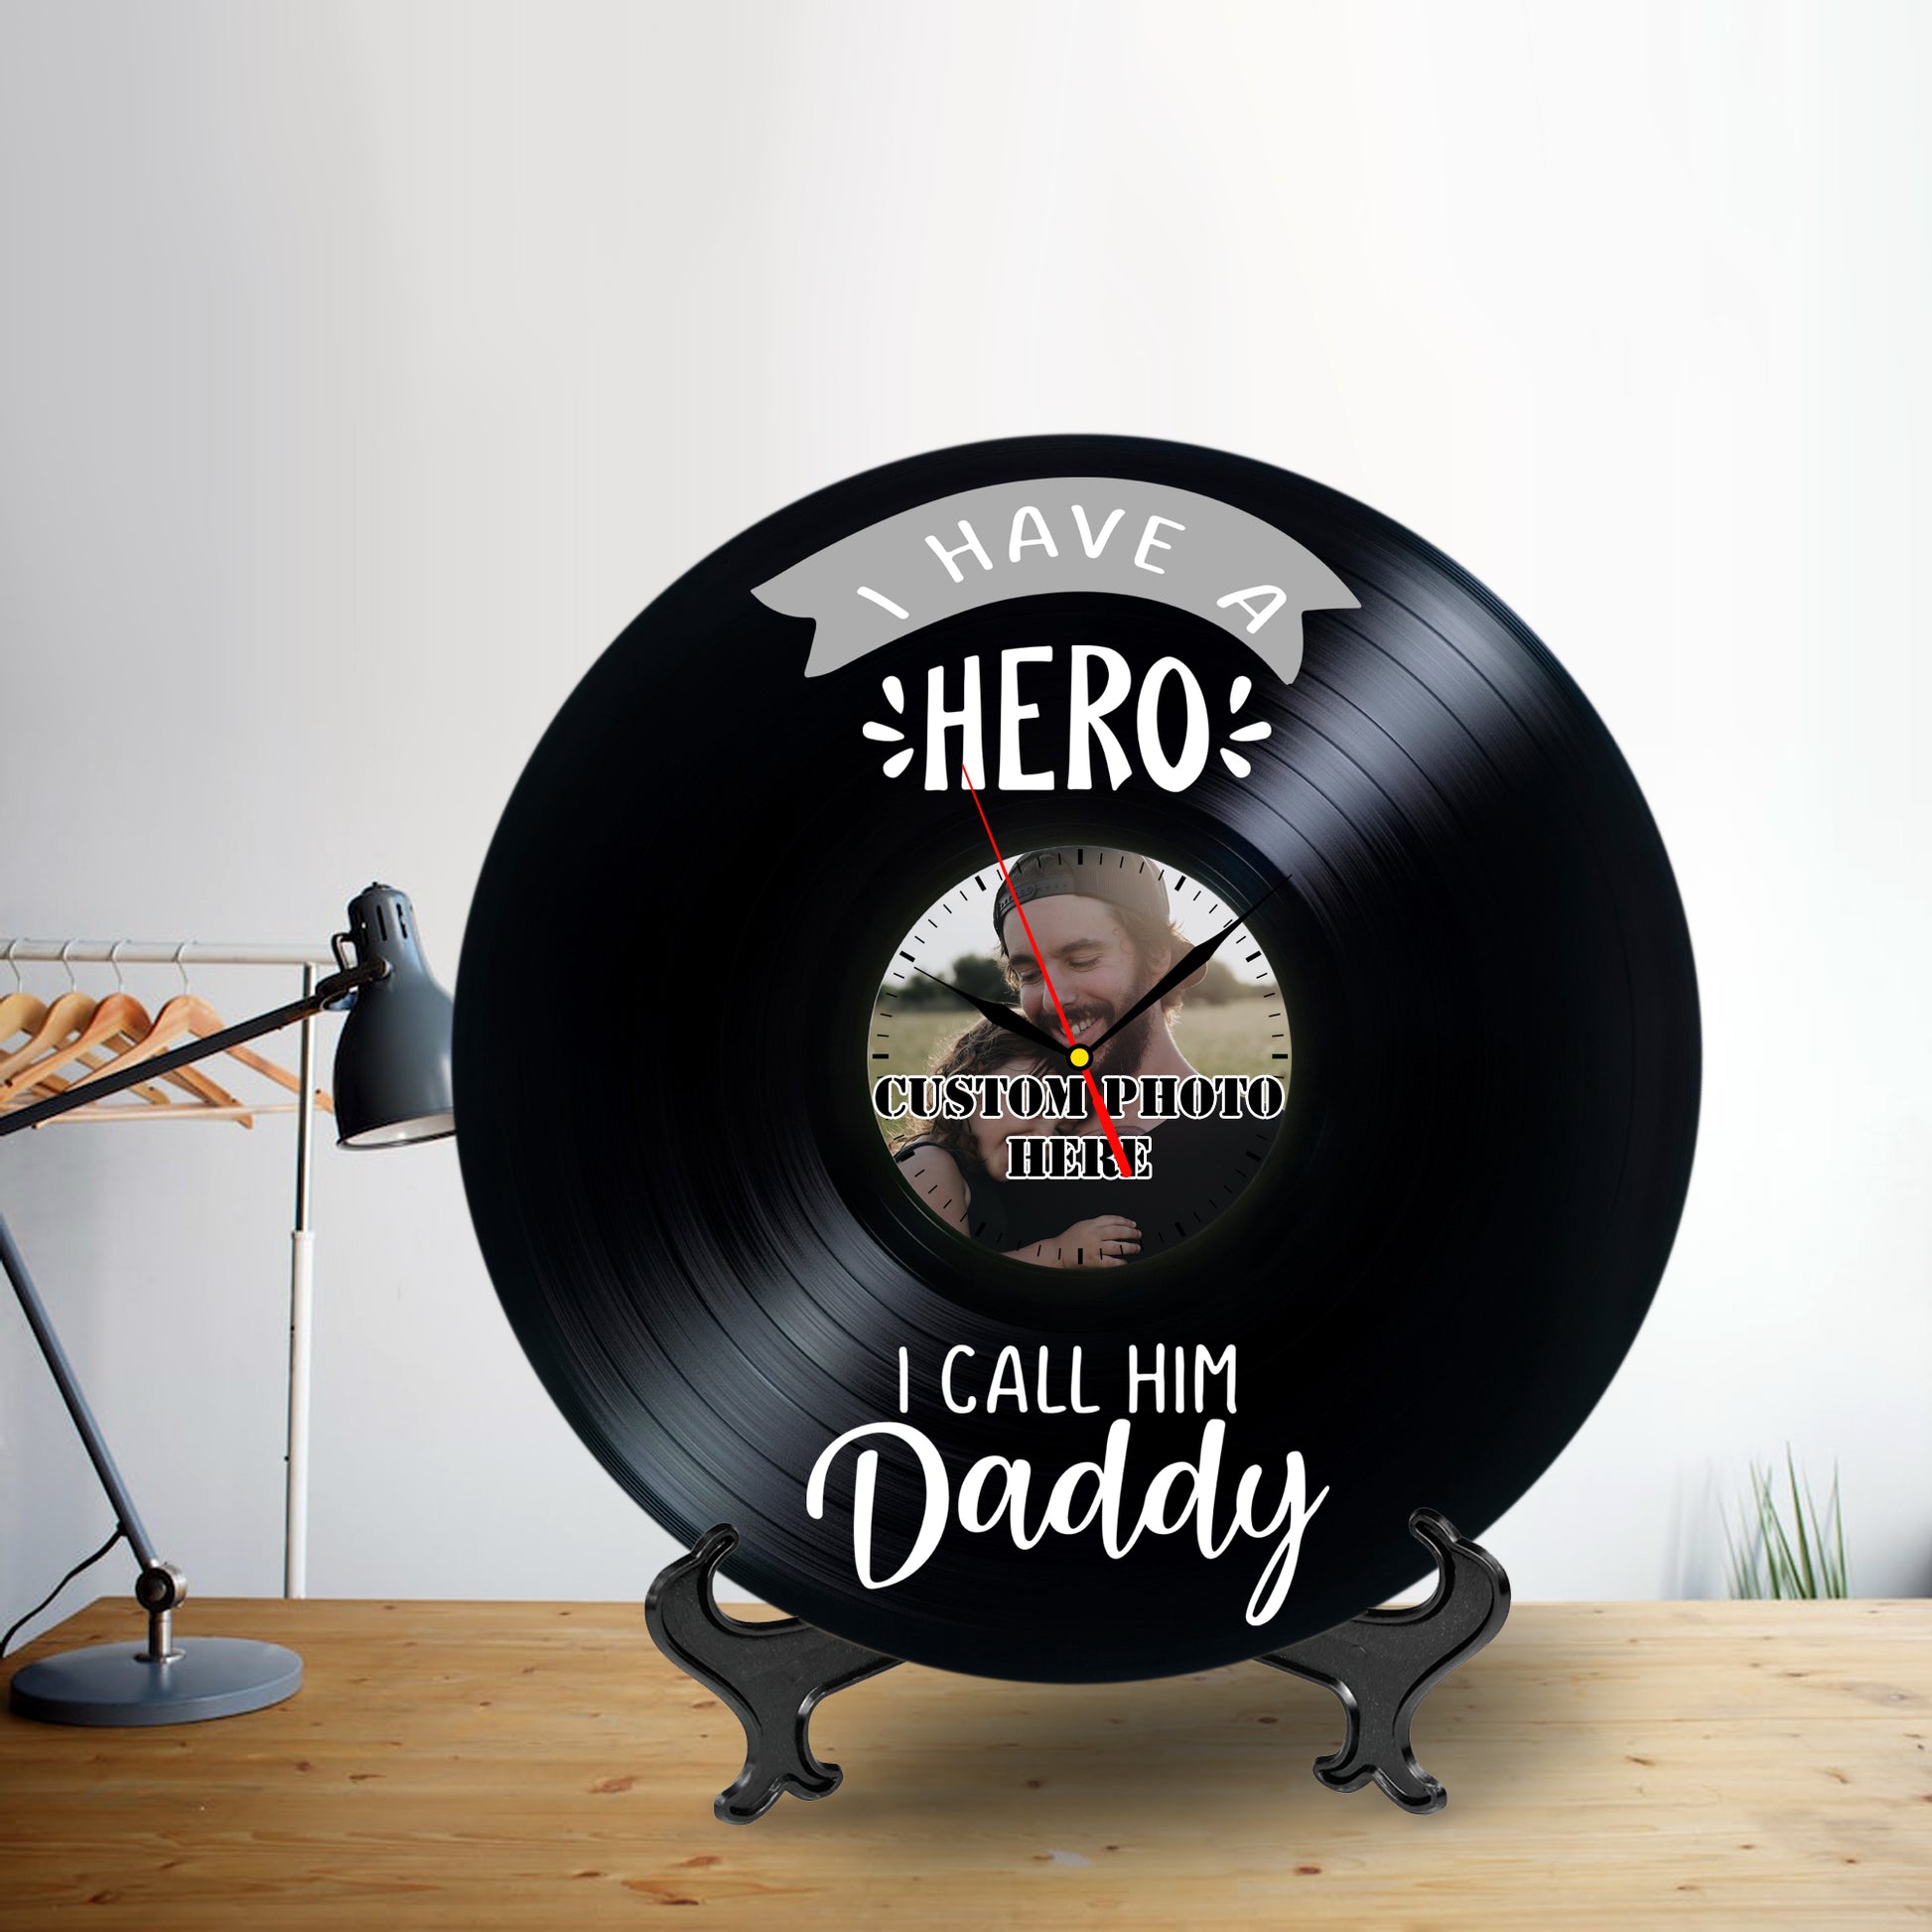 Personalized Photo Lp Record Clock Gift for Father